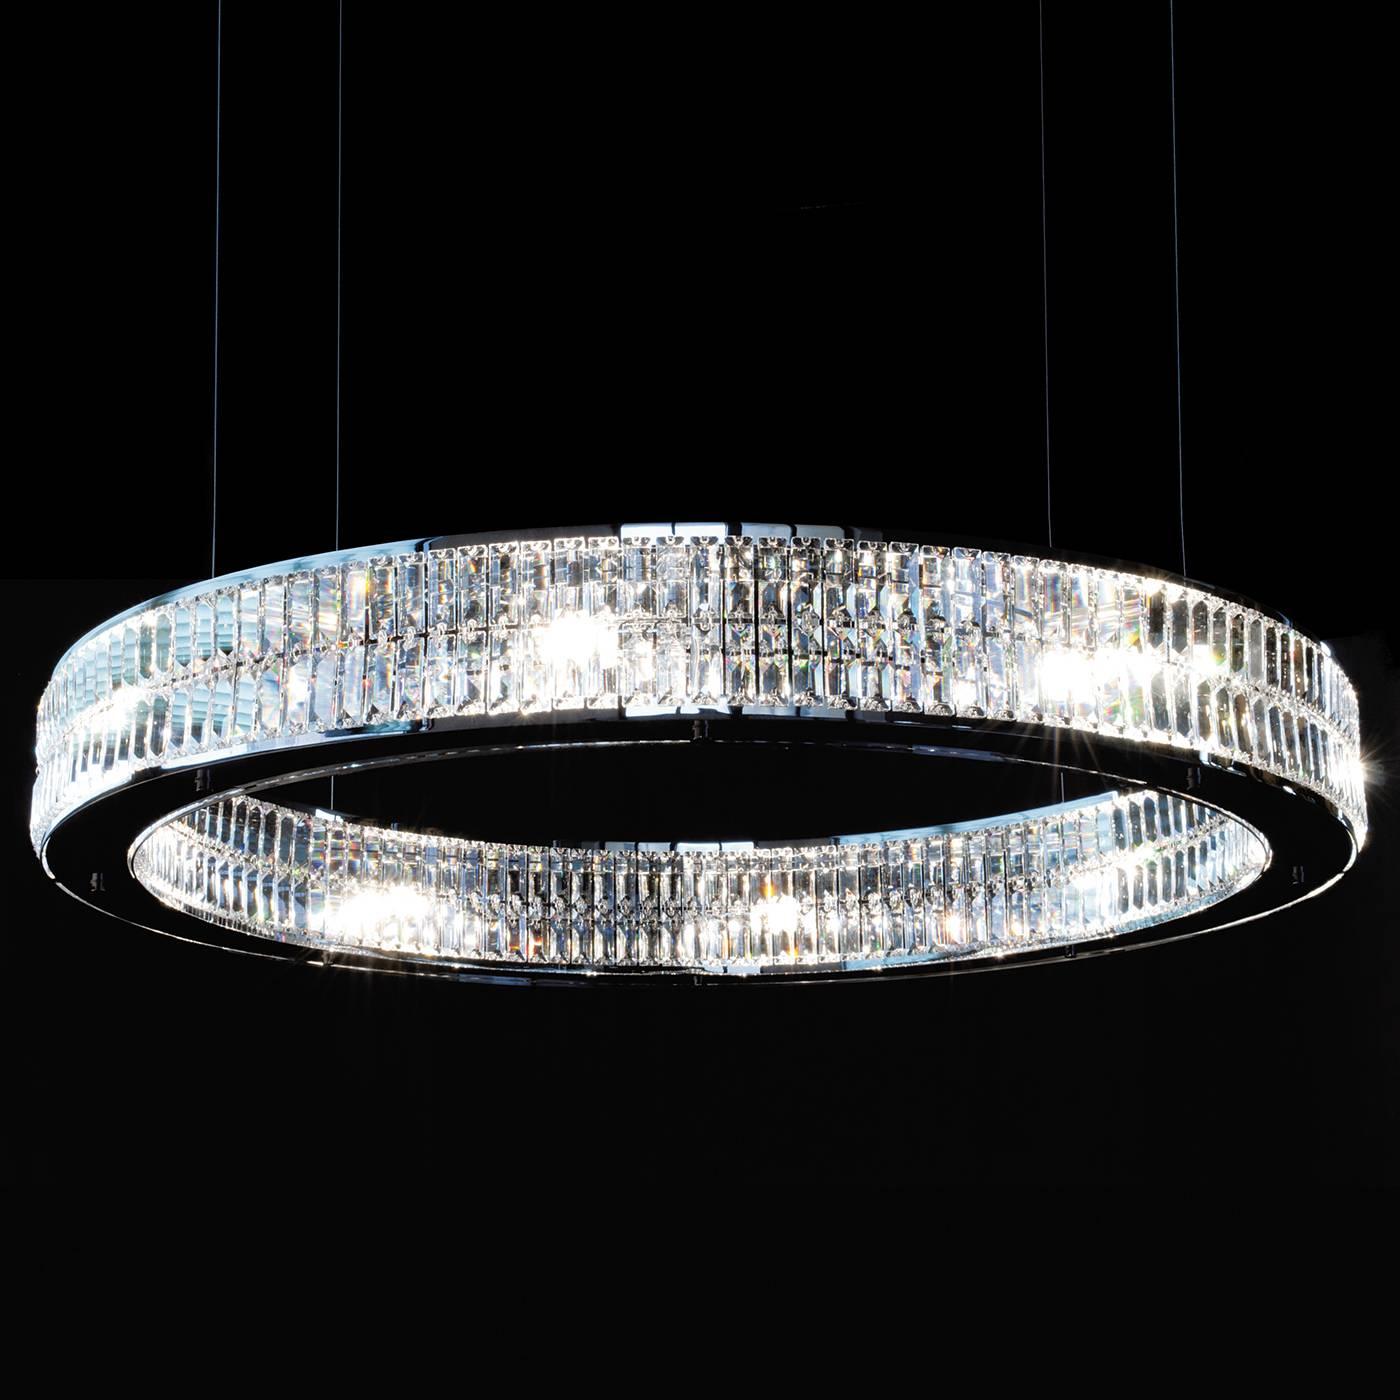 A lavish piece of functional decor, this chandelier will be a sumptuous and modern accent in a contemporary home as well as a classic interior. The ring that constitutes its shape is made up of two layers of handmade crystal prisms attached both